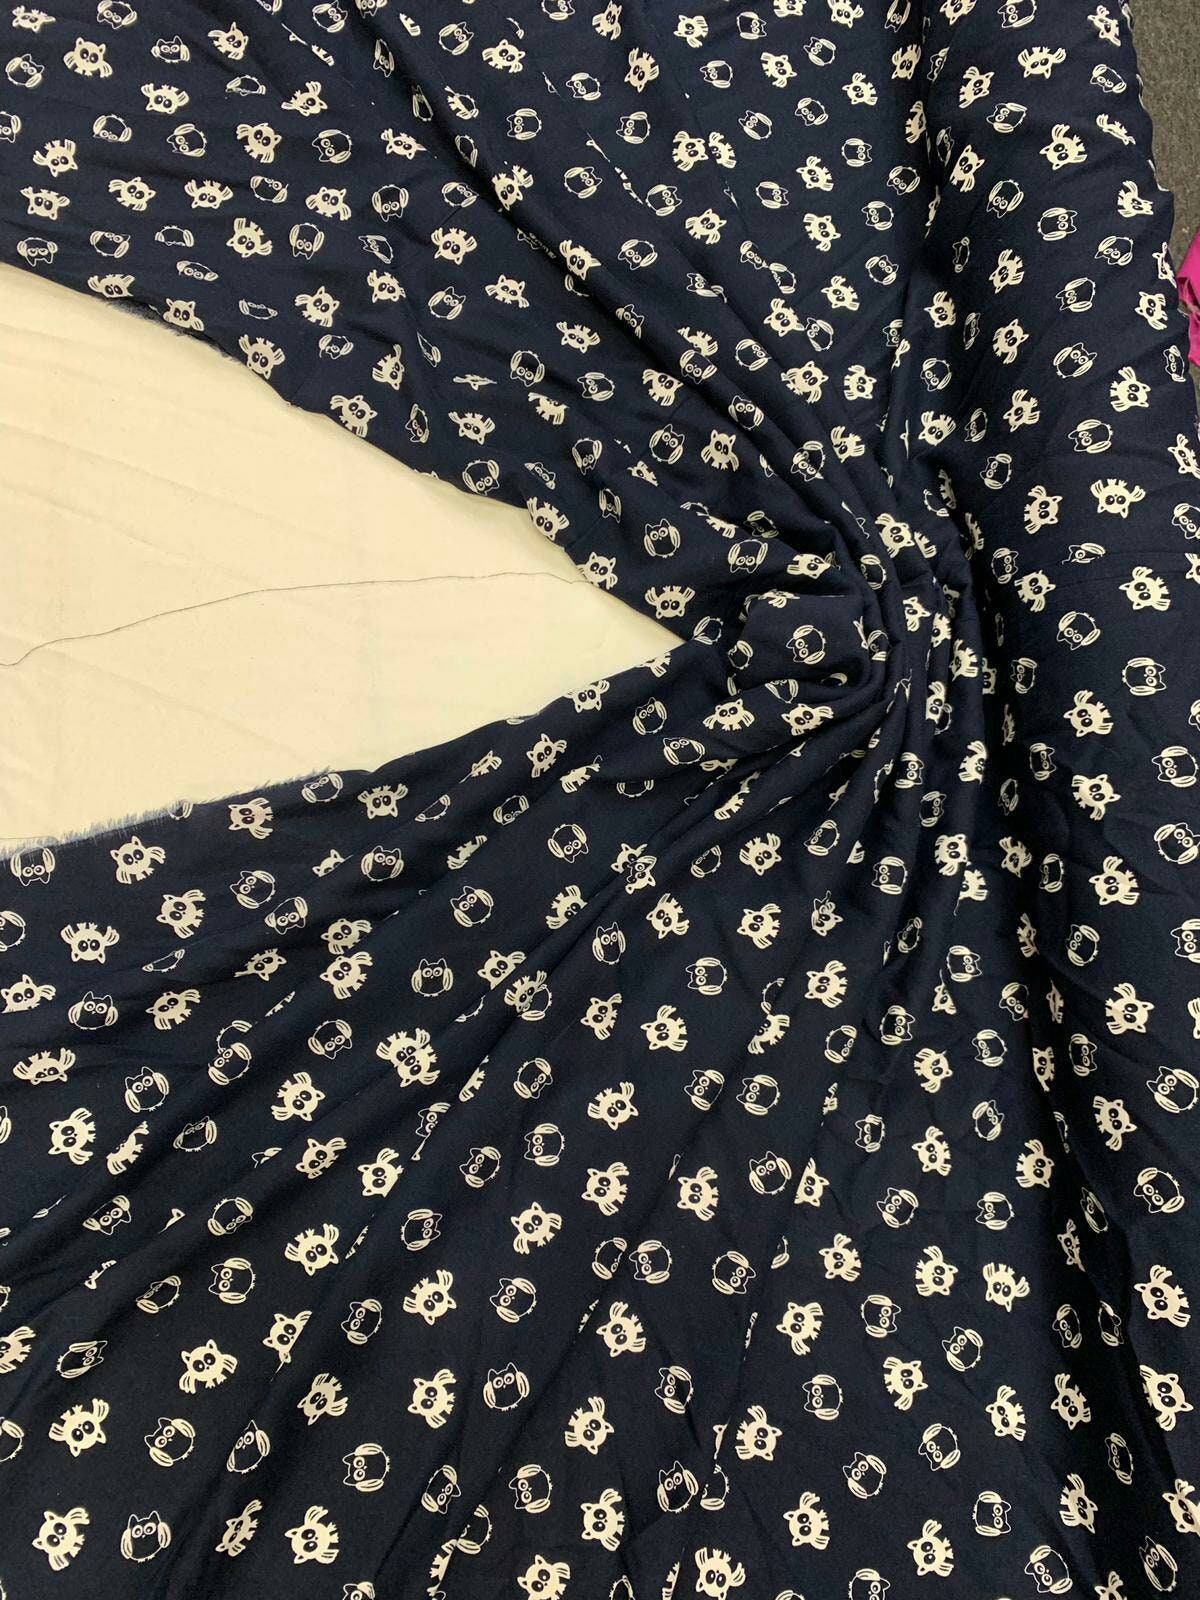 Rayon challis WHAT A HOOT owls on navy blue background 58 inches wide fabric sold by the yard soft organic fabric kids